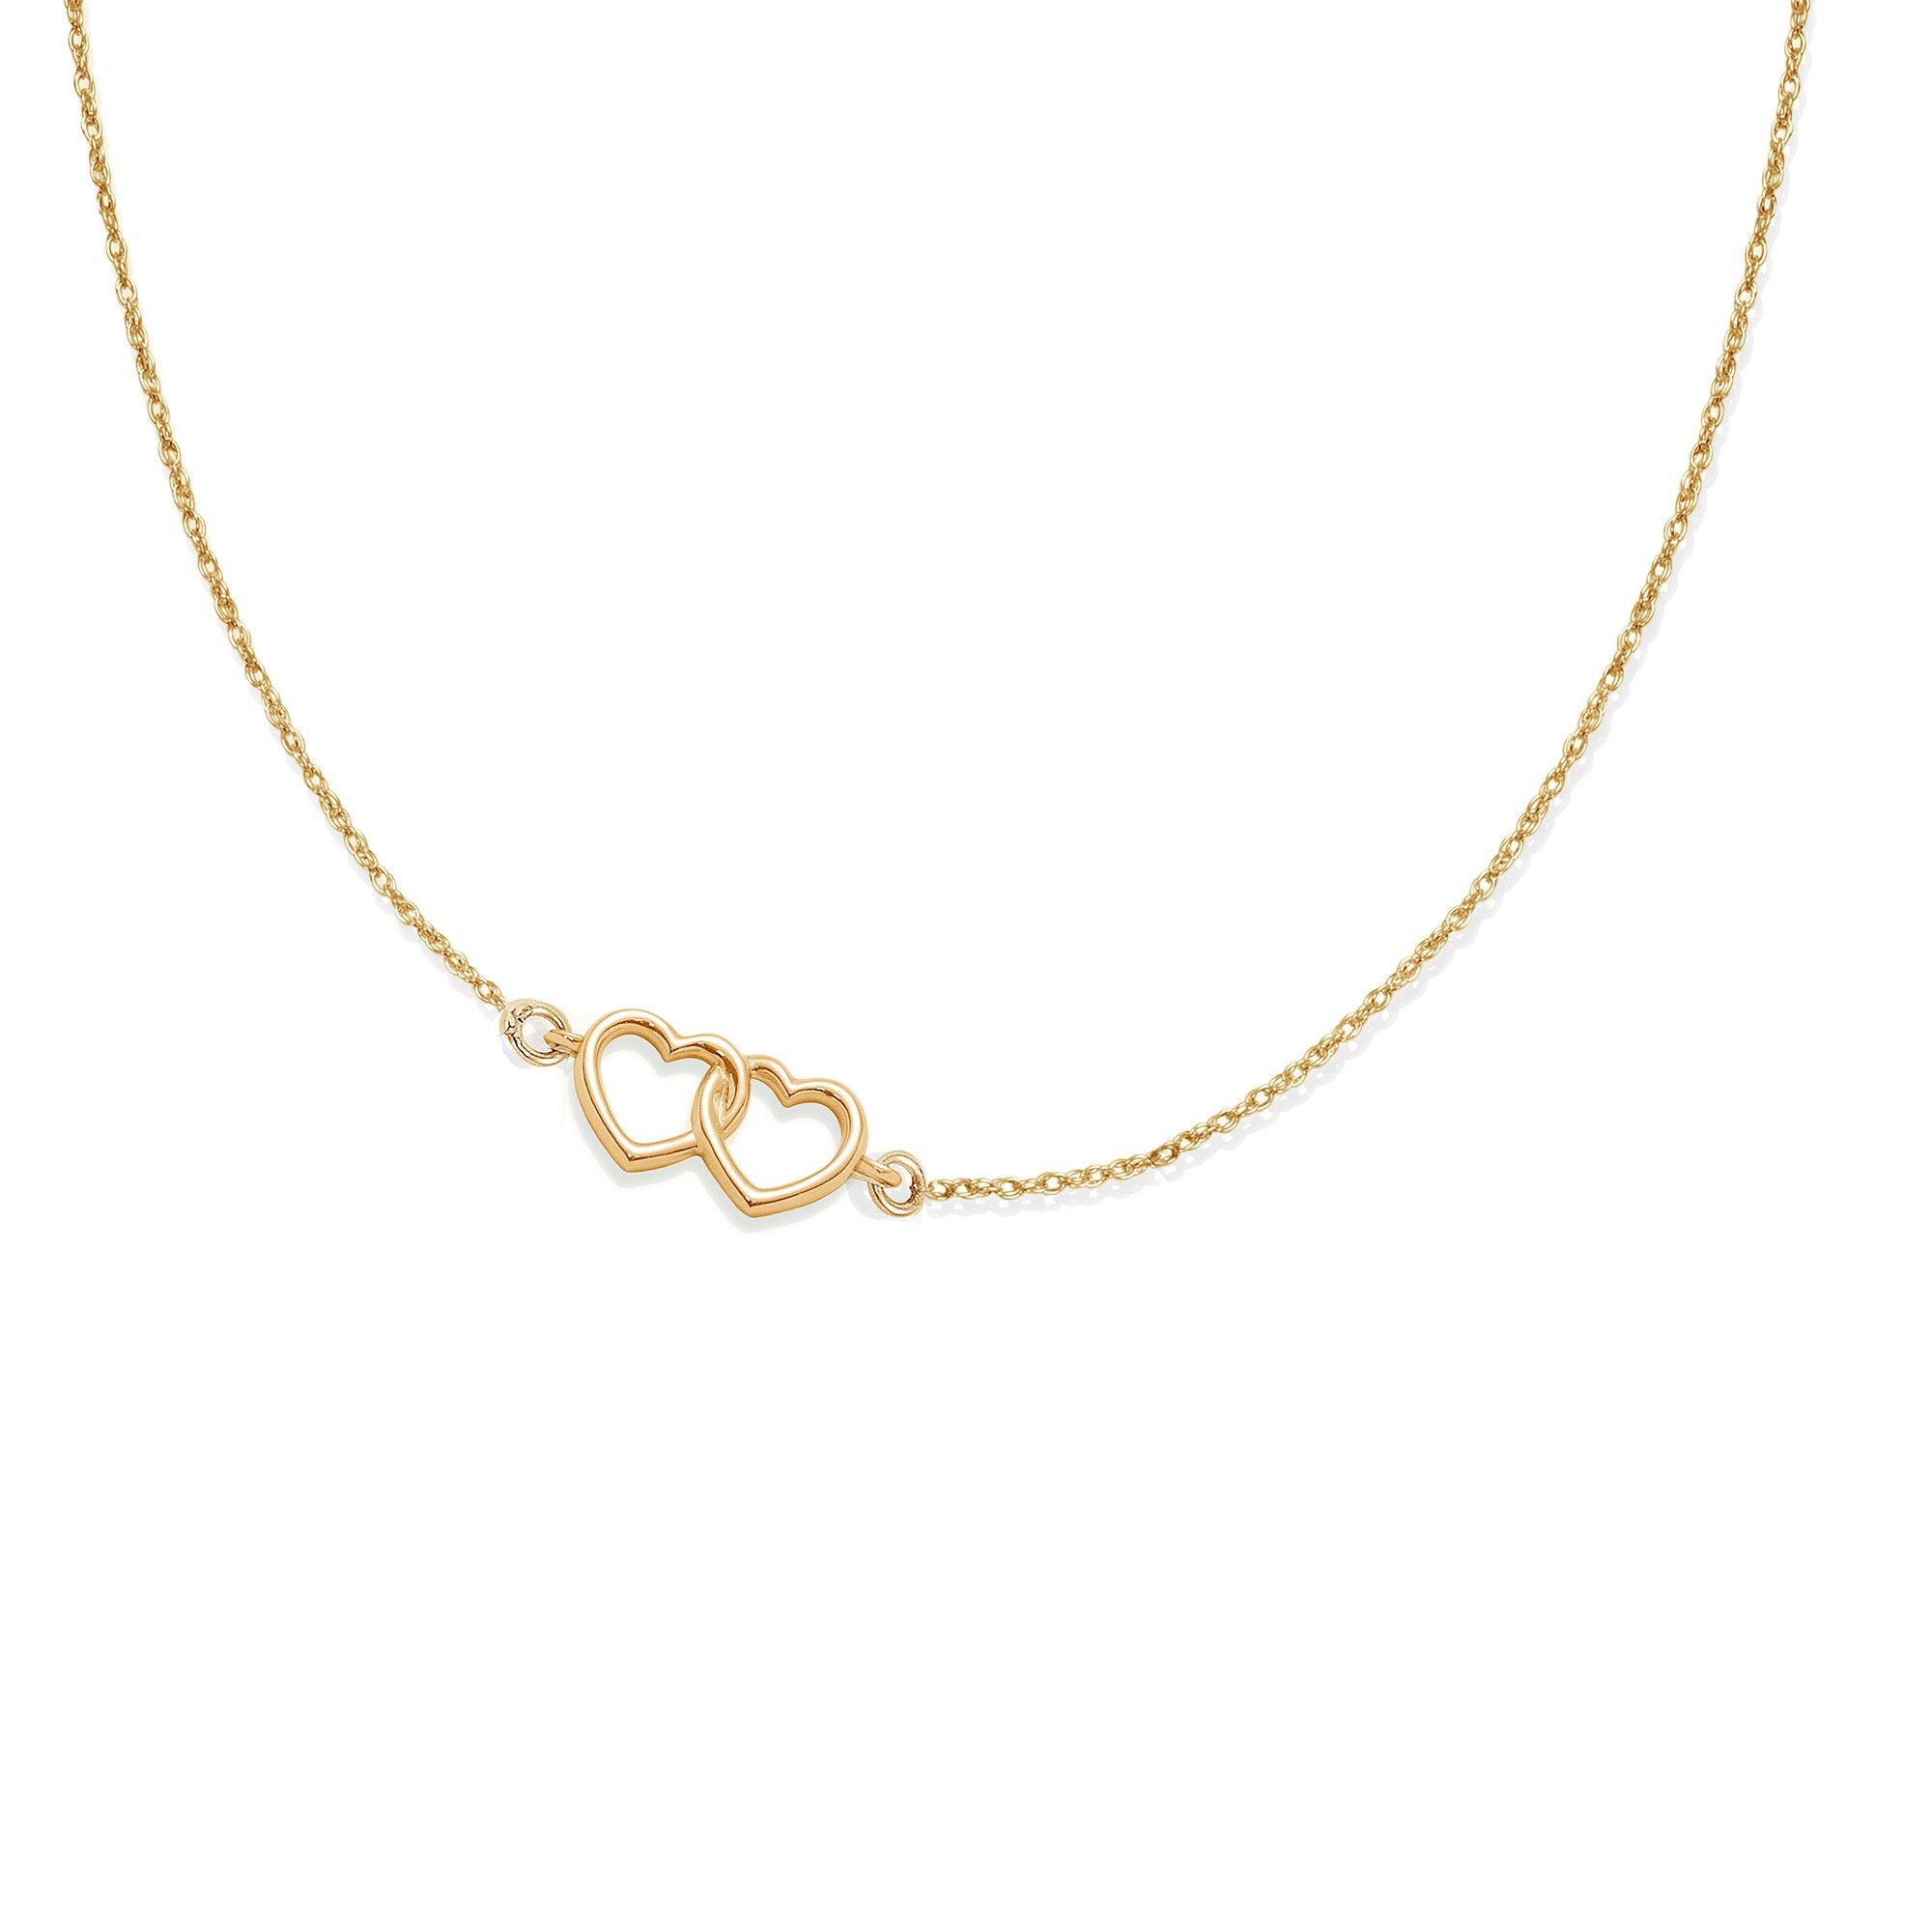 Lilou – Necklace With Gold Plated Joined Hearts On A Chain With Most Popular Joined Hearts Chain Necklaces (View 2 of 25)